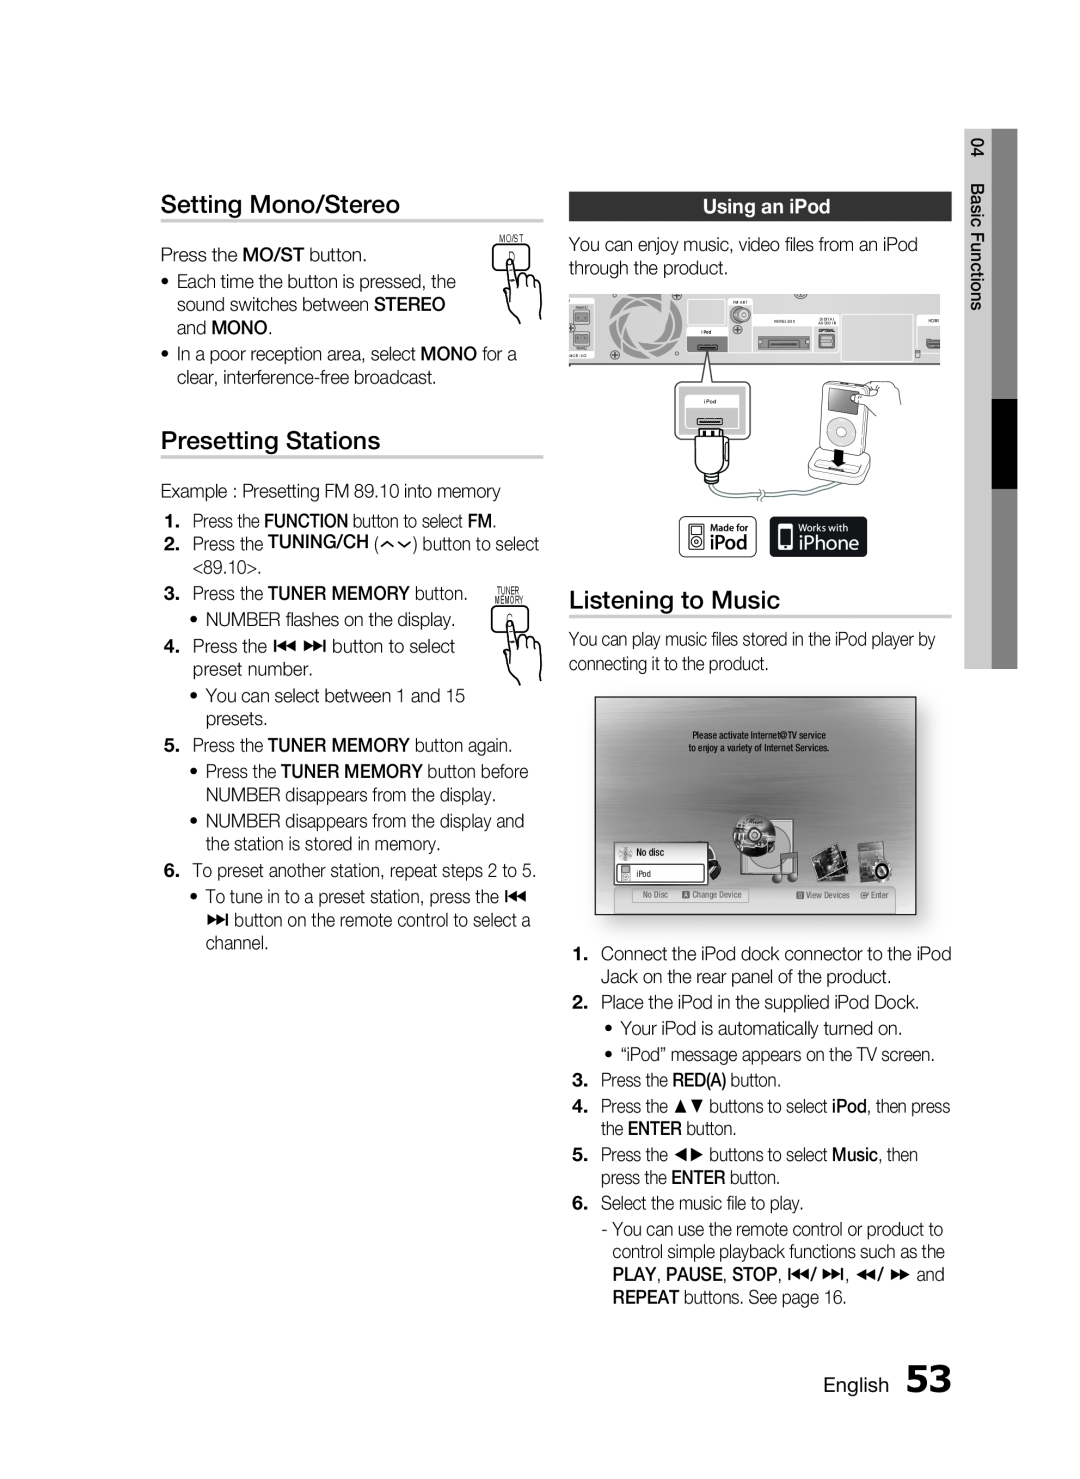 Samsung AH68-02258S Setting Mono/Stereo, Presetting Stations, Listening to Music, Using an iPod, through the product 